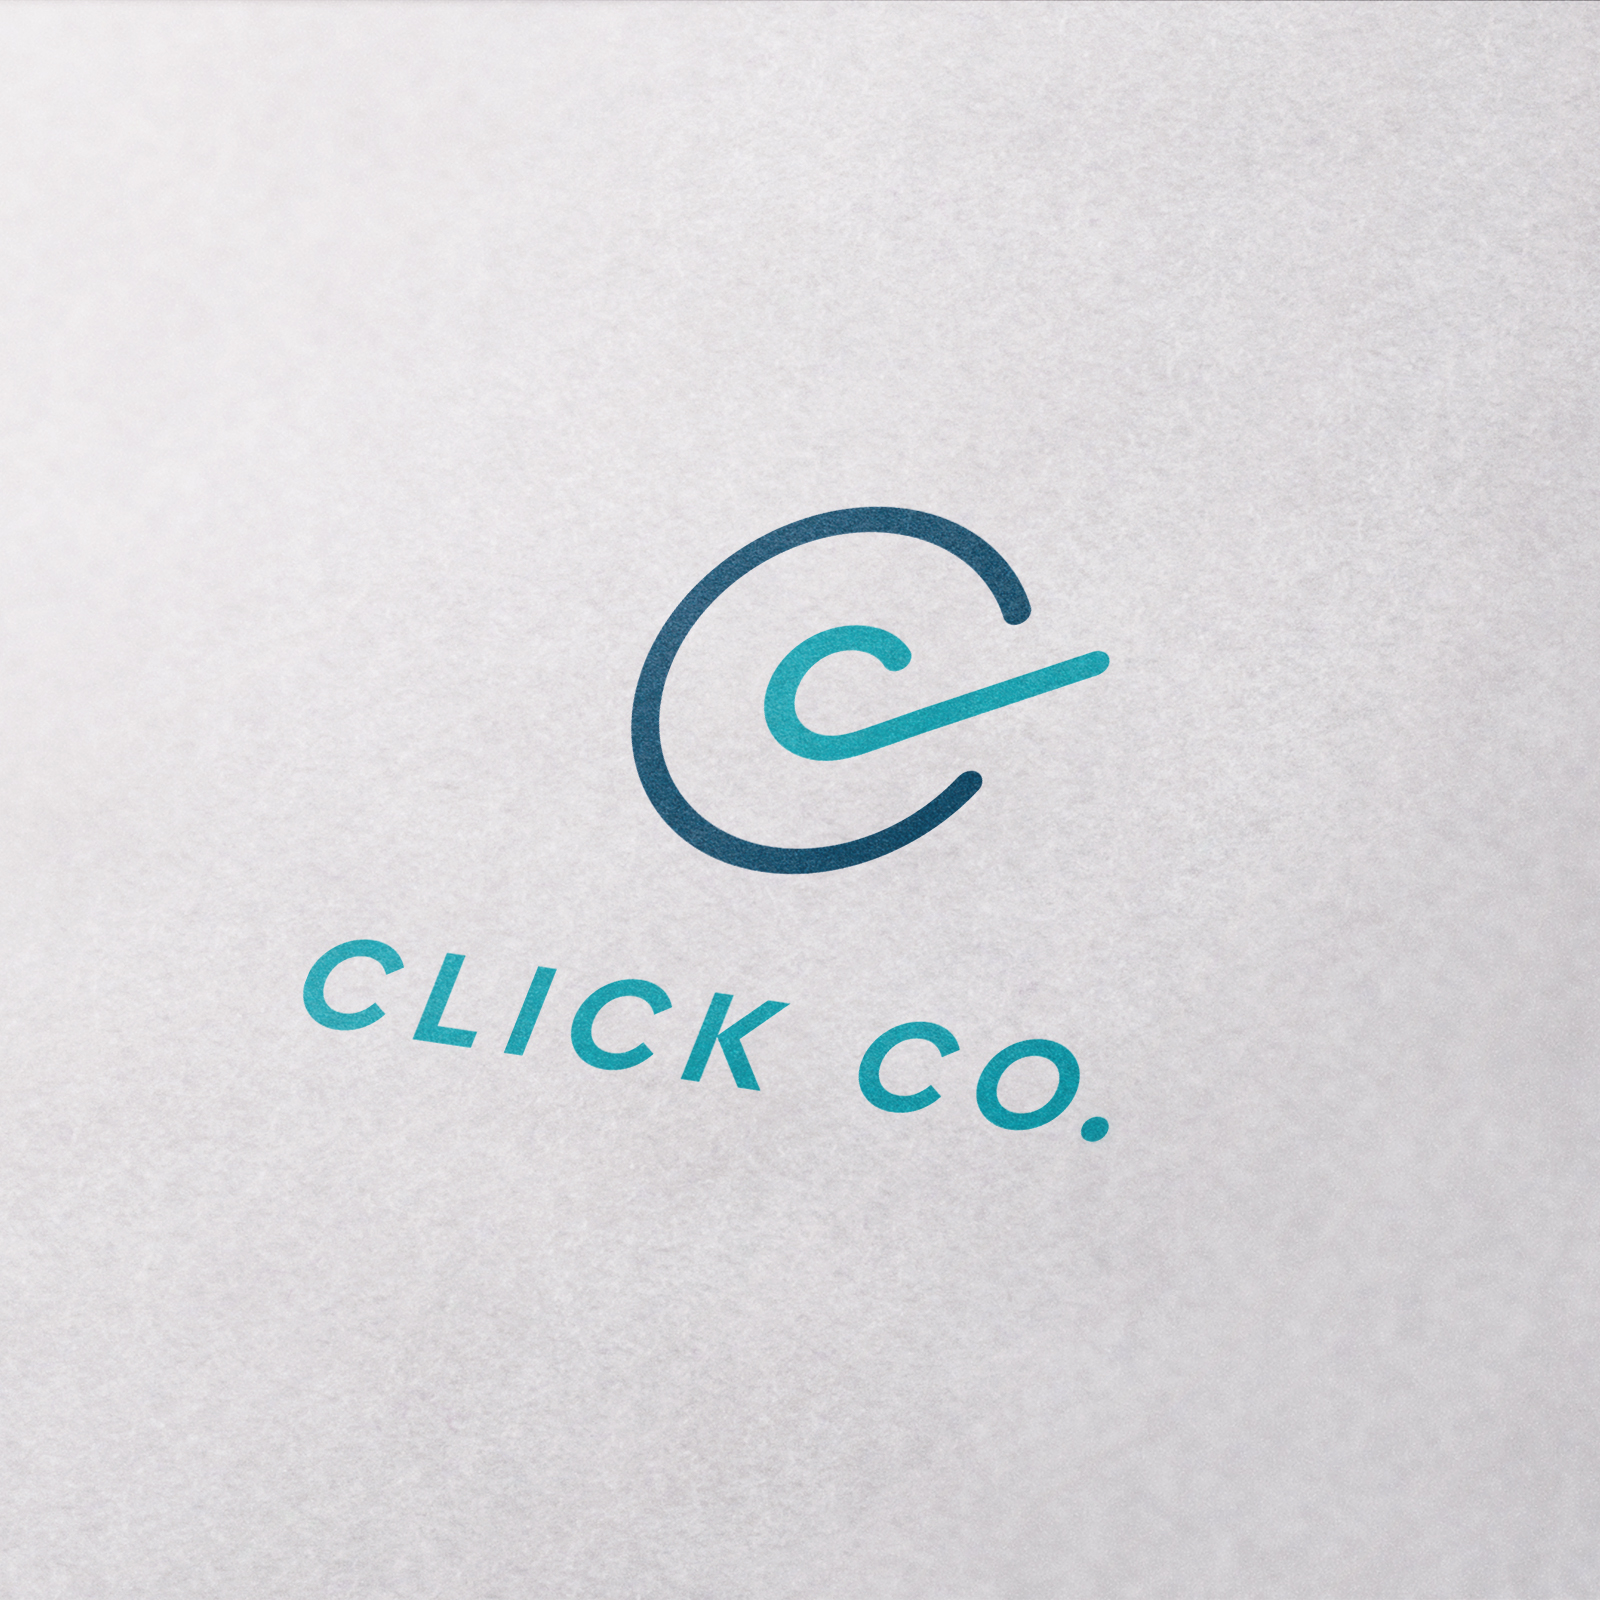 The Click Co